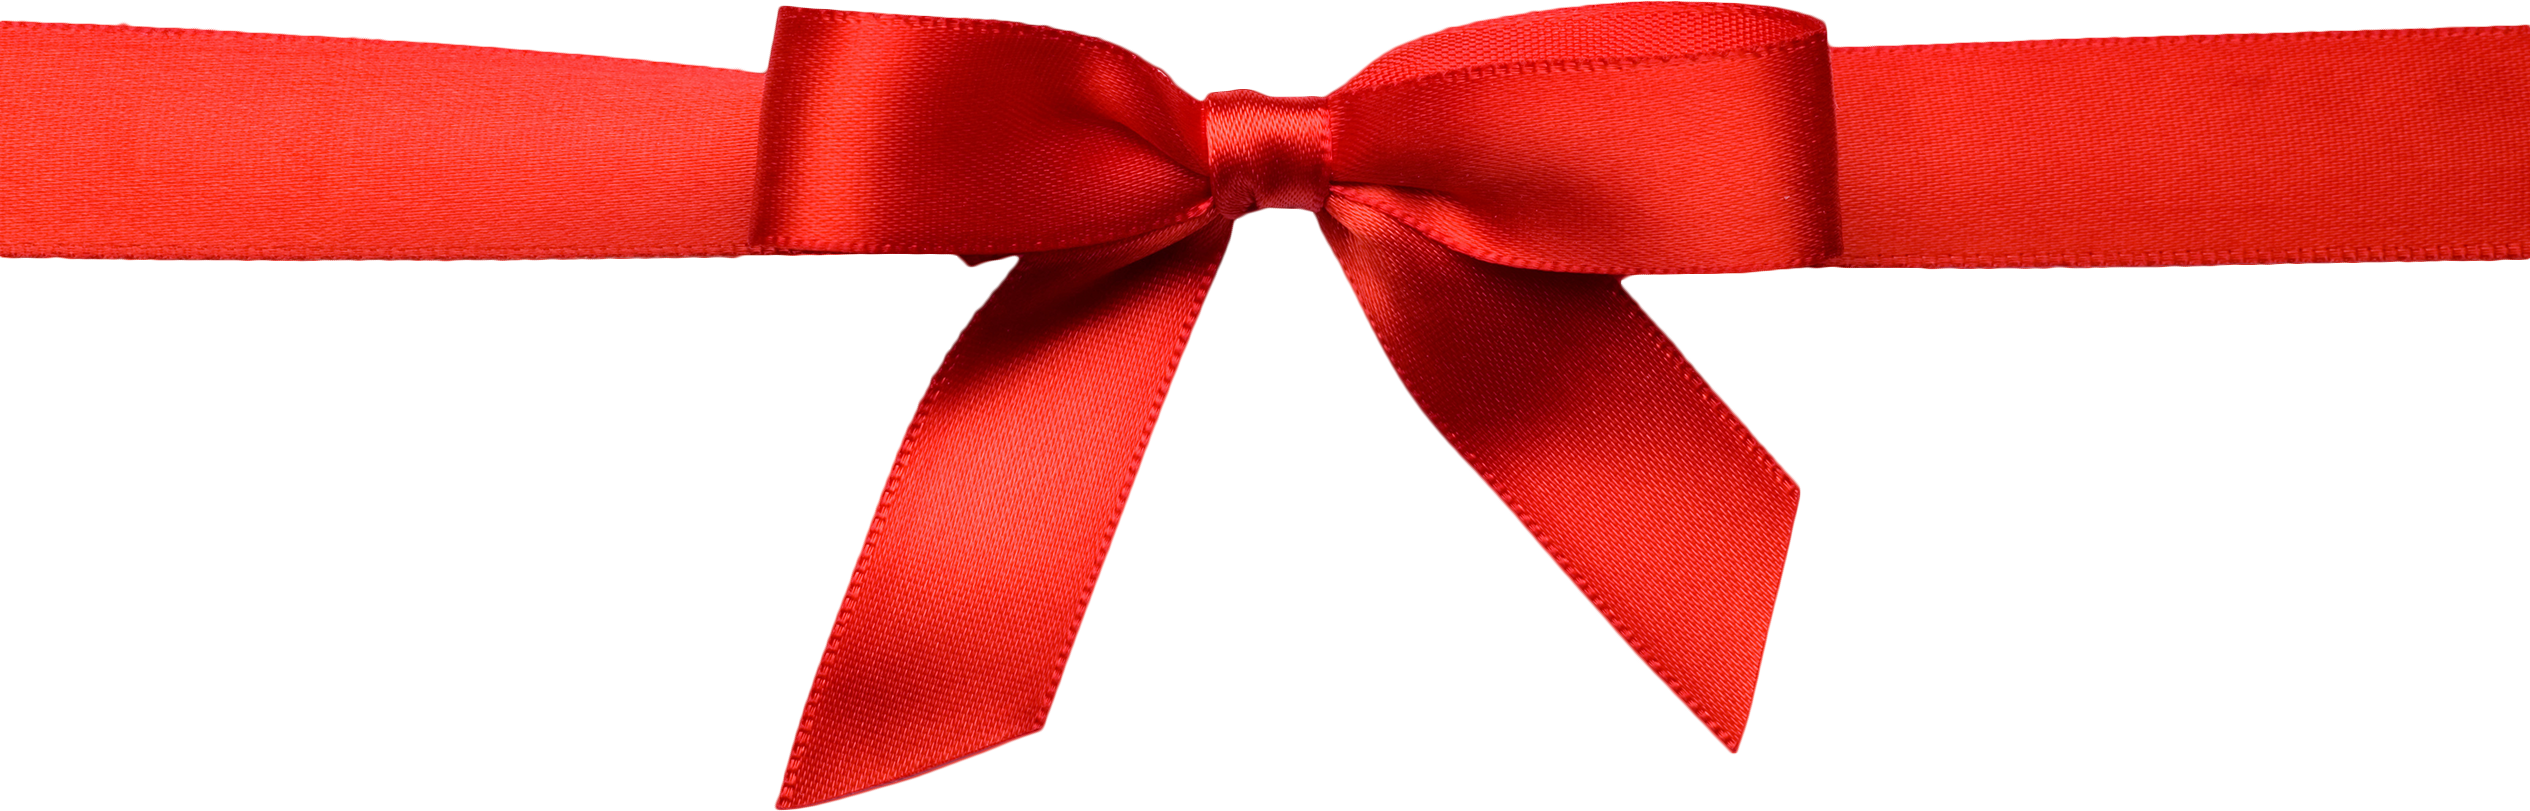 Special Offers - Gift Card Ribbon Png (2530x811)